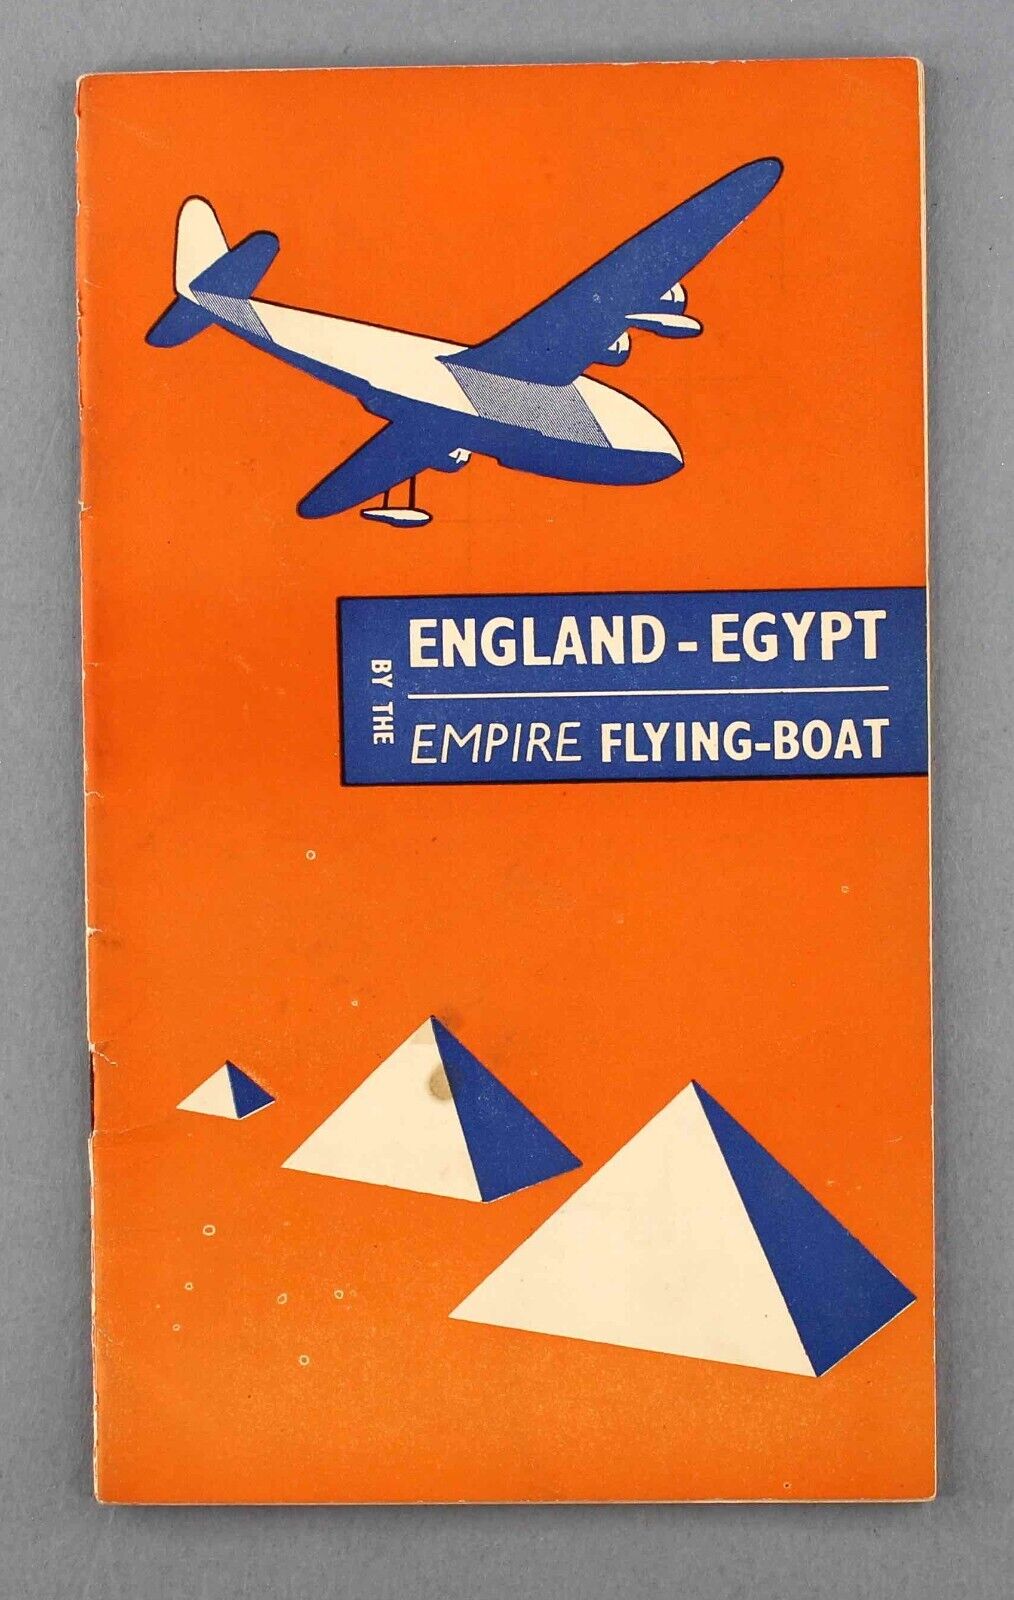 IMPERIAL AIRWAYS ENGLAND - EGYPT INFLIGHT ROUTE MAP BY THE EMPIRE FLYING BOAT